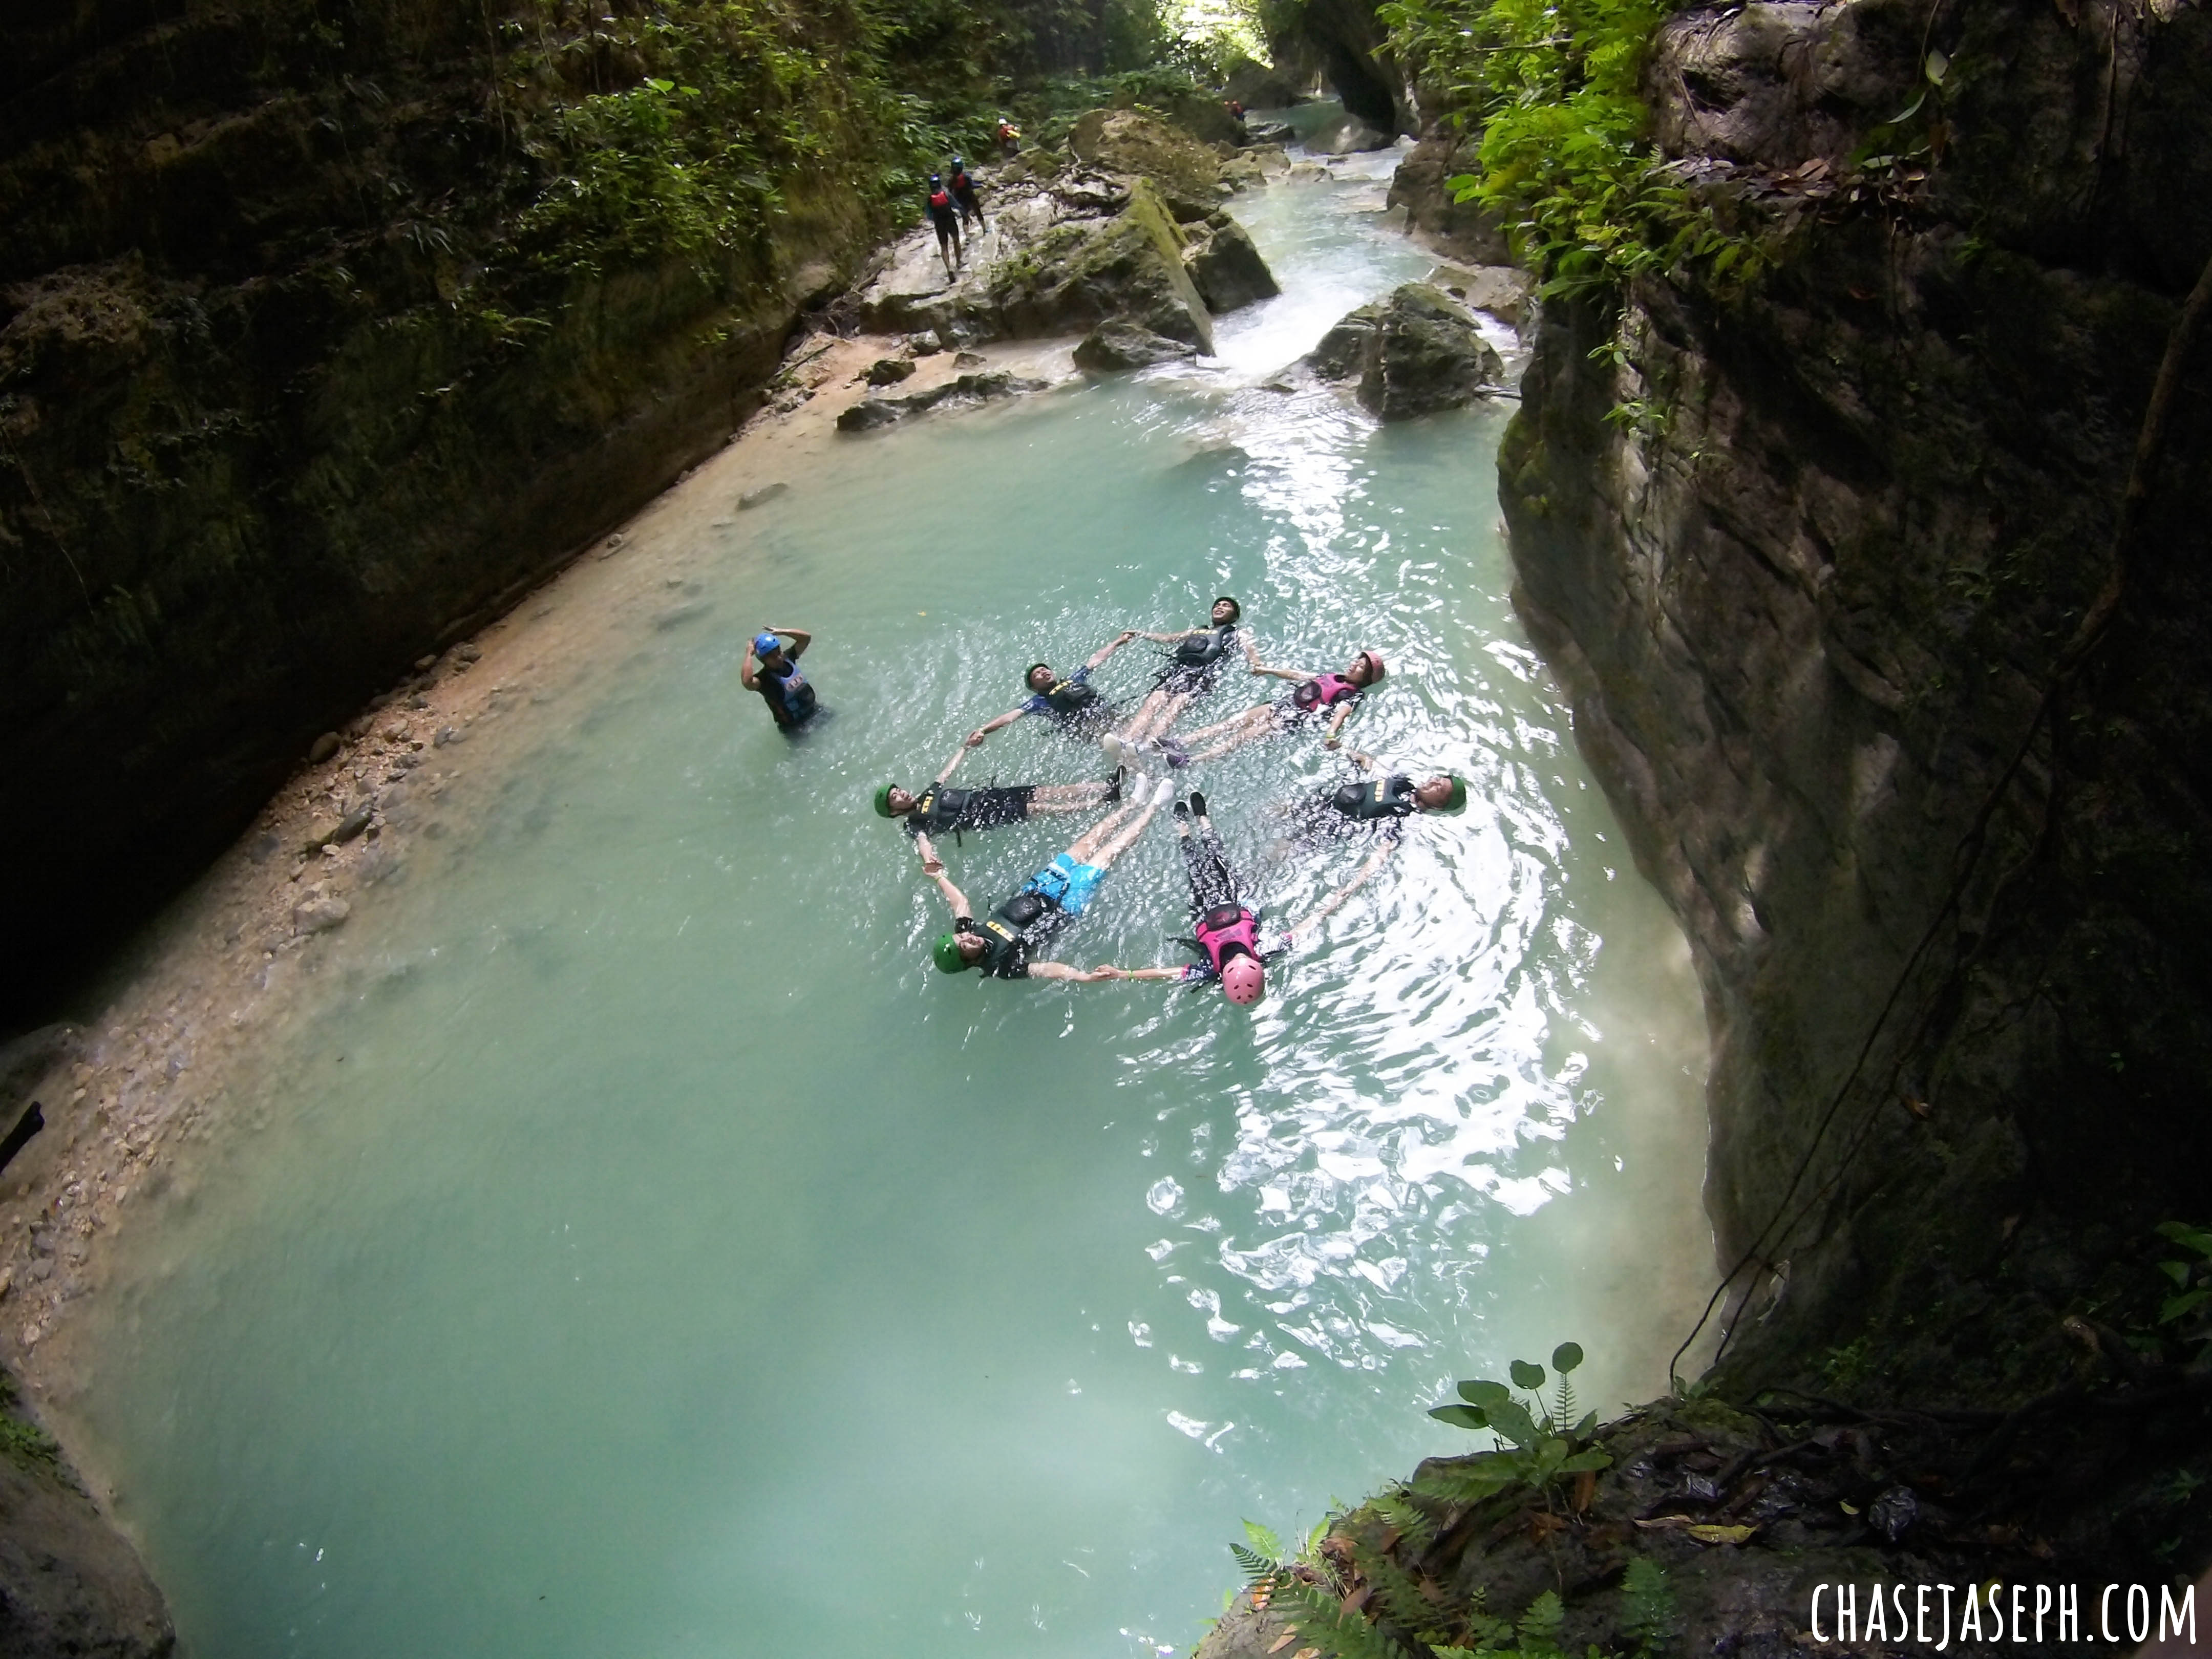 Canyoneering in Cebu - Wet and Wild! (Travel Guide)